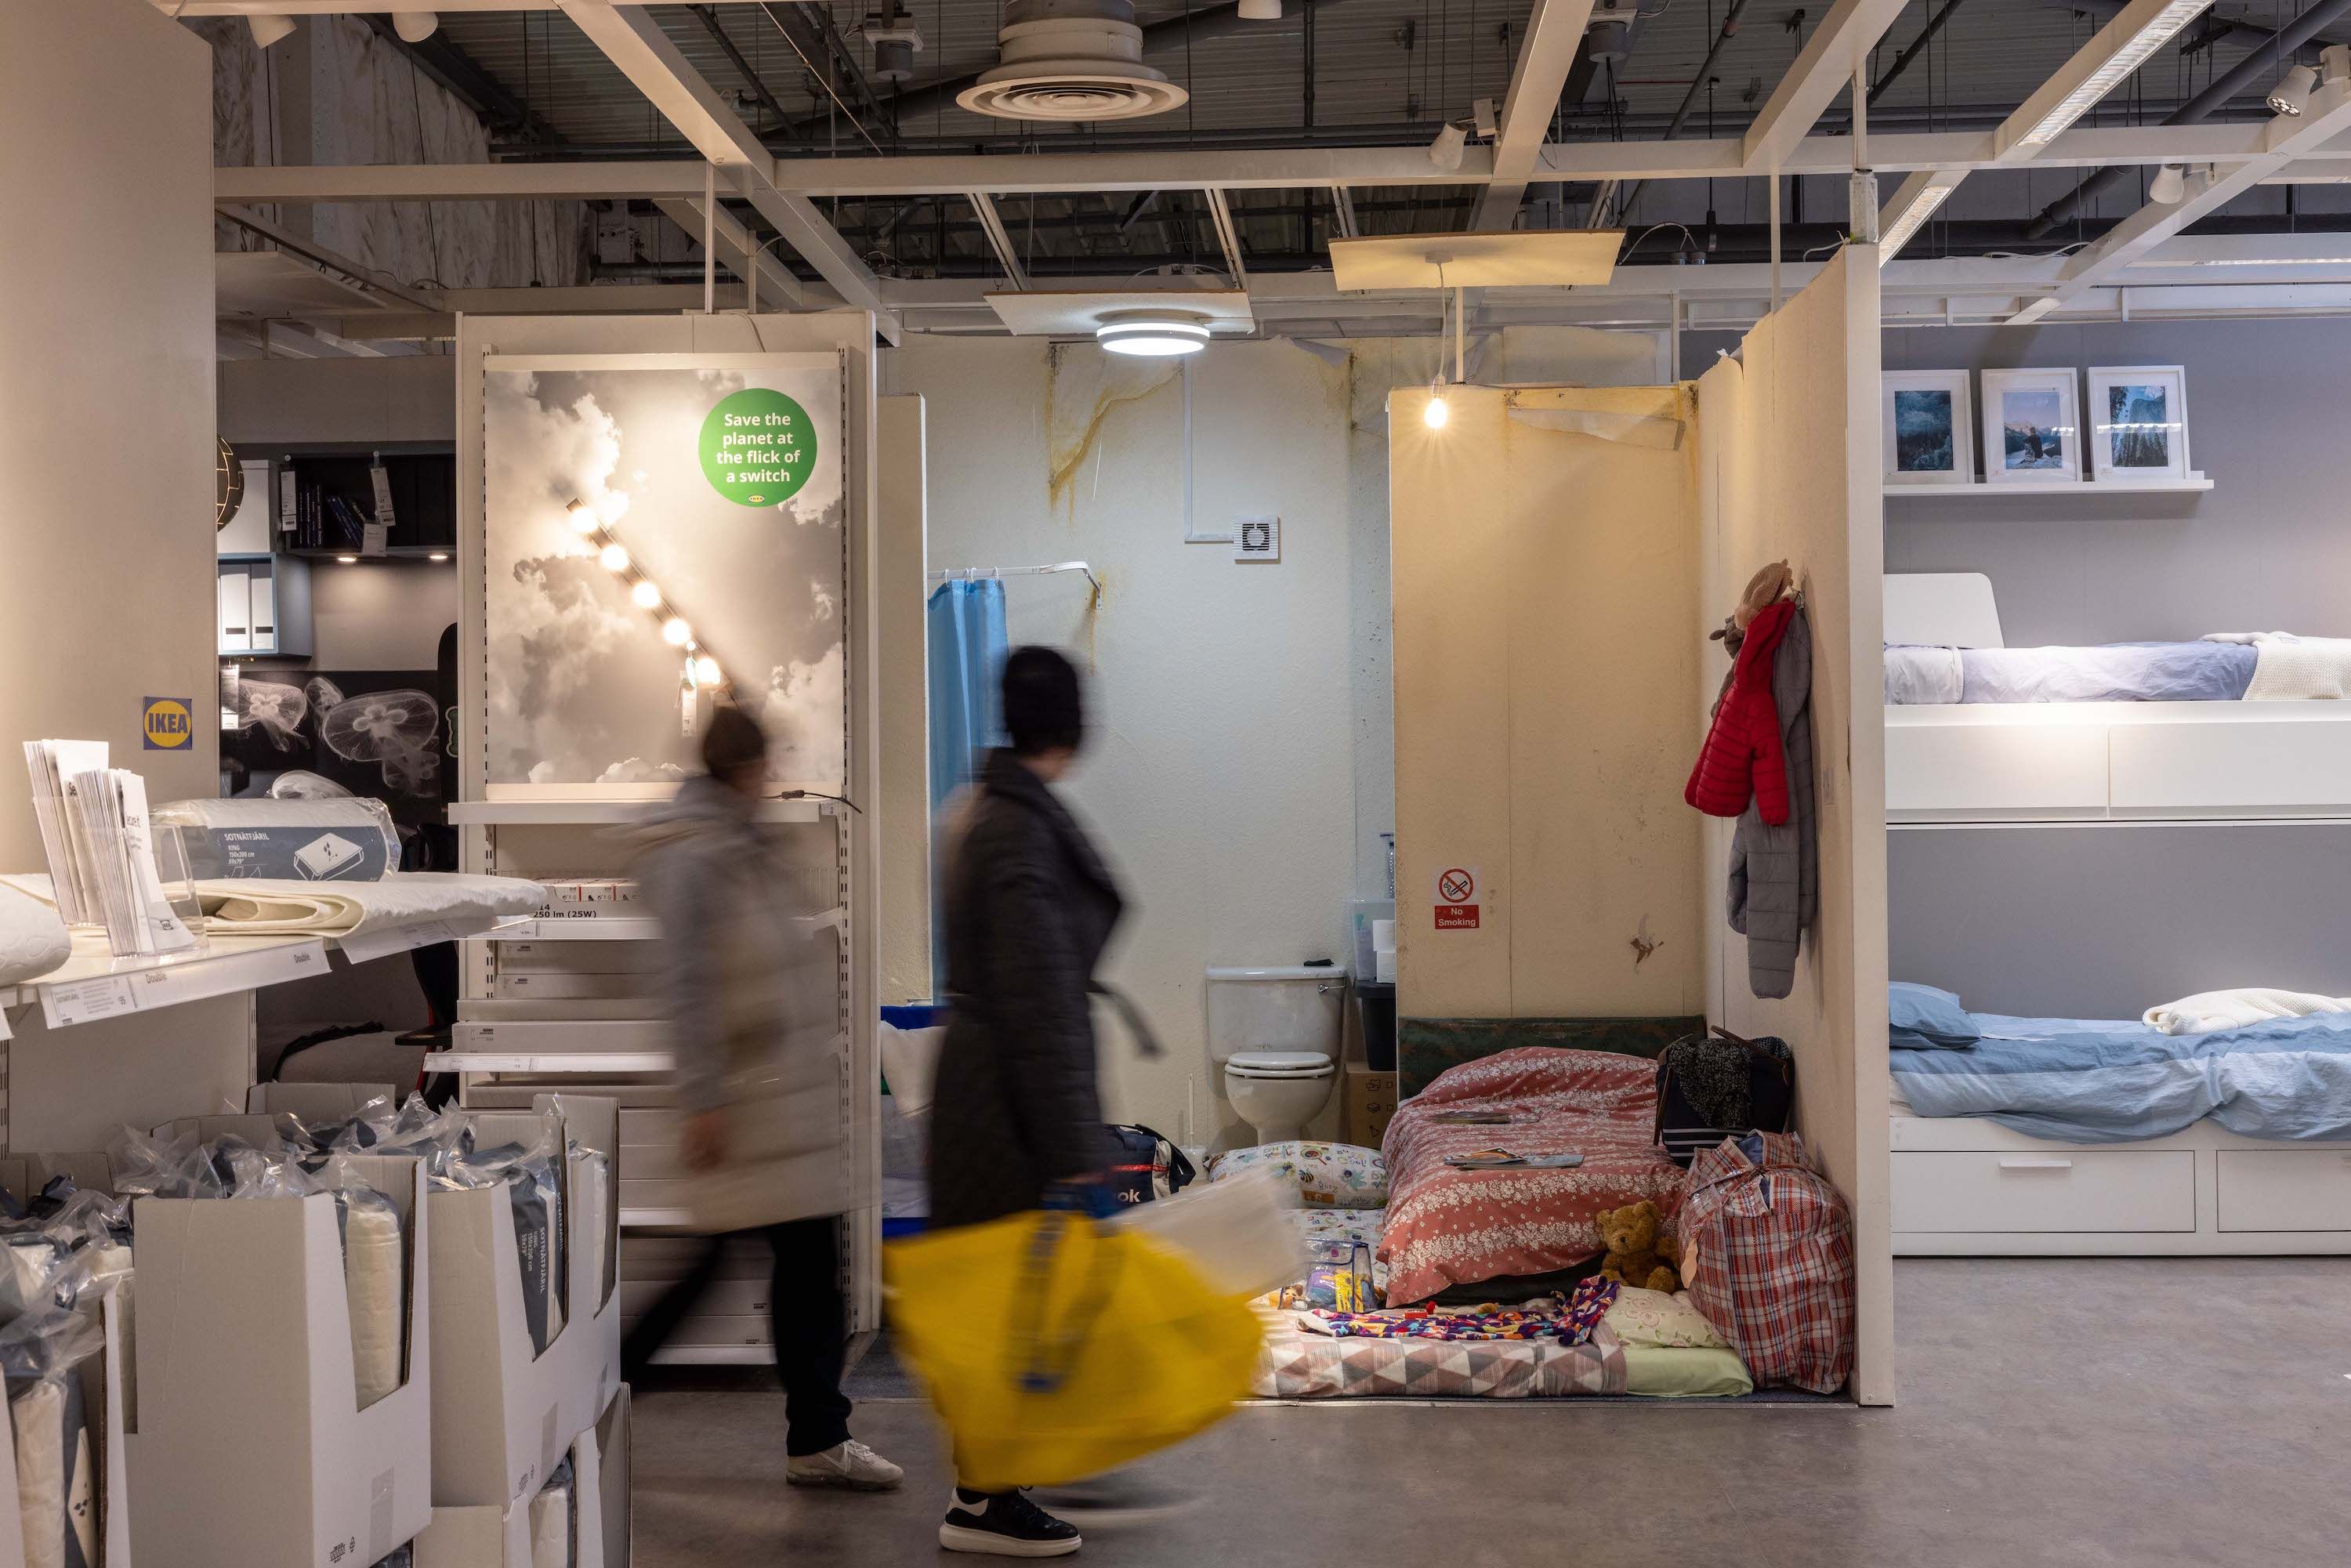 IKEA launches 'Real Life Roomsets' in four UK stores revealing the reality of temporary accommodation